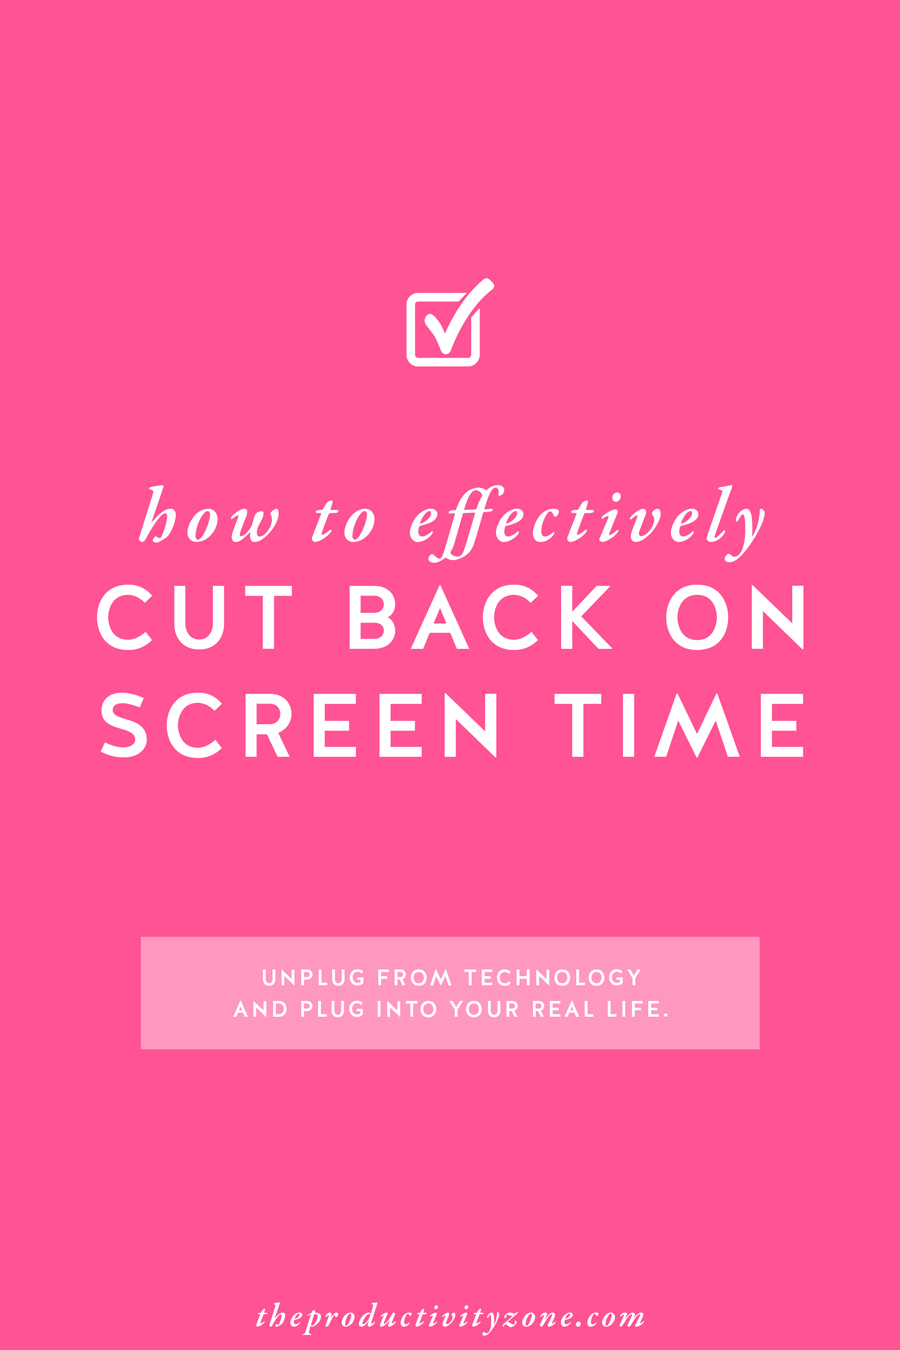 Addicted to technology? It’s time to instill healthier habits and better boundaries when it comes to technology (for yourself and your family). Over on The Productivity Zone, I’m sharing 6 of the most effective ways you can cut back on screen time starting today!!